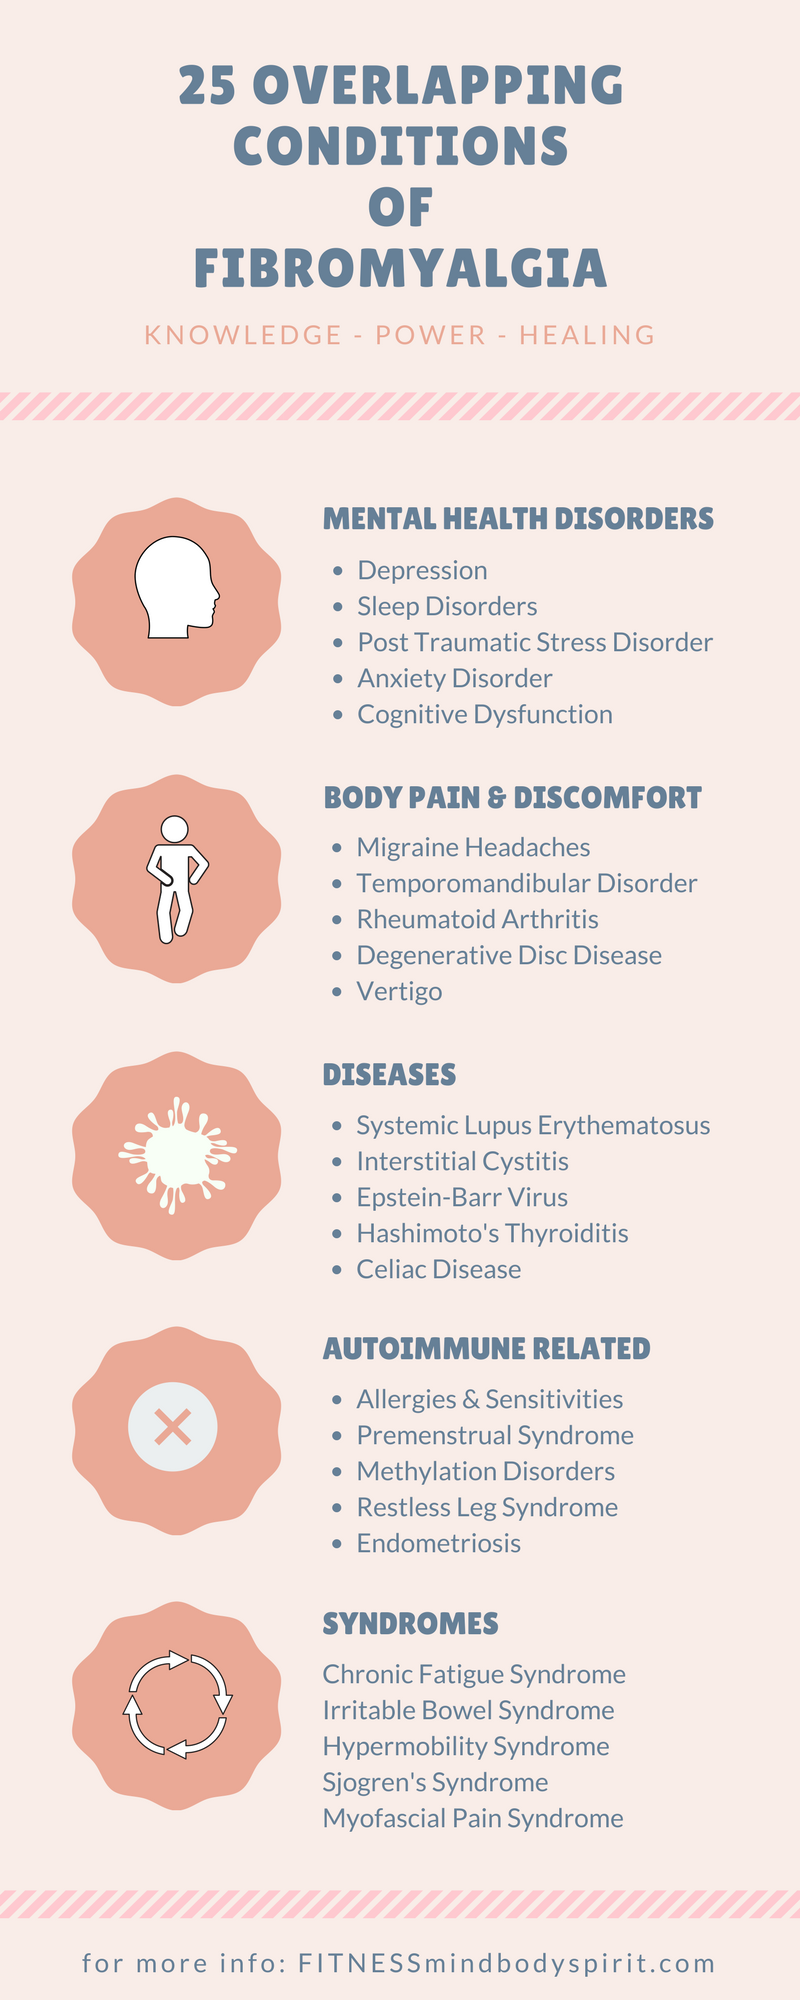 Overlapping Conditions of Fibromyalgia